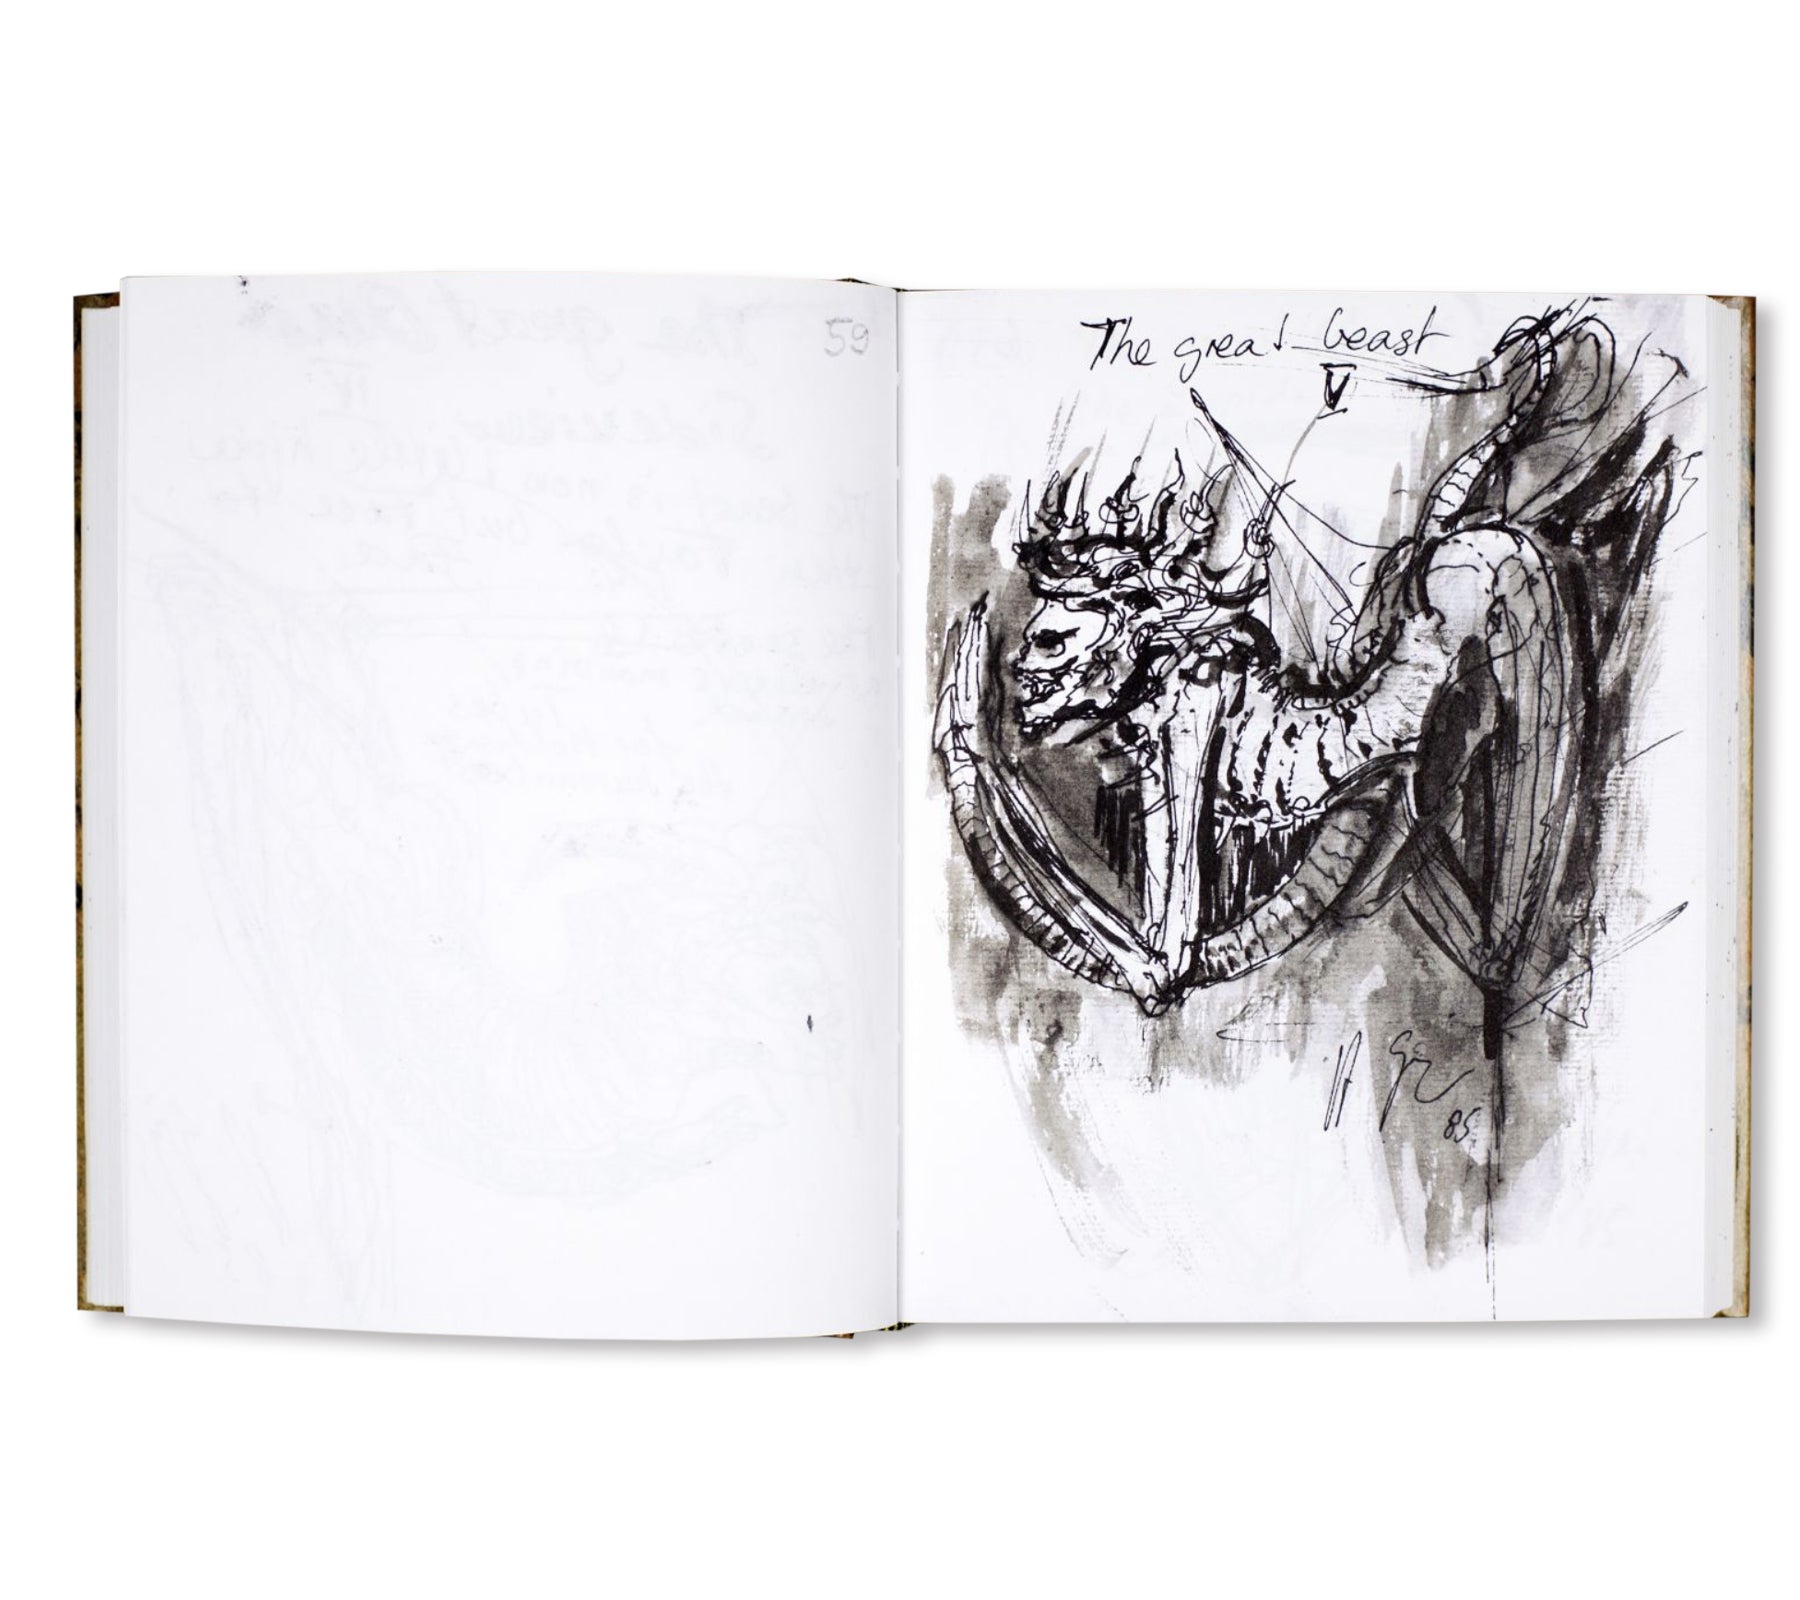 5 – POLTERGEIST II: DRAWINGS 1983-1985 by H.R.Giger